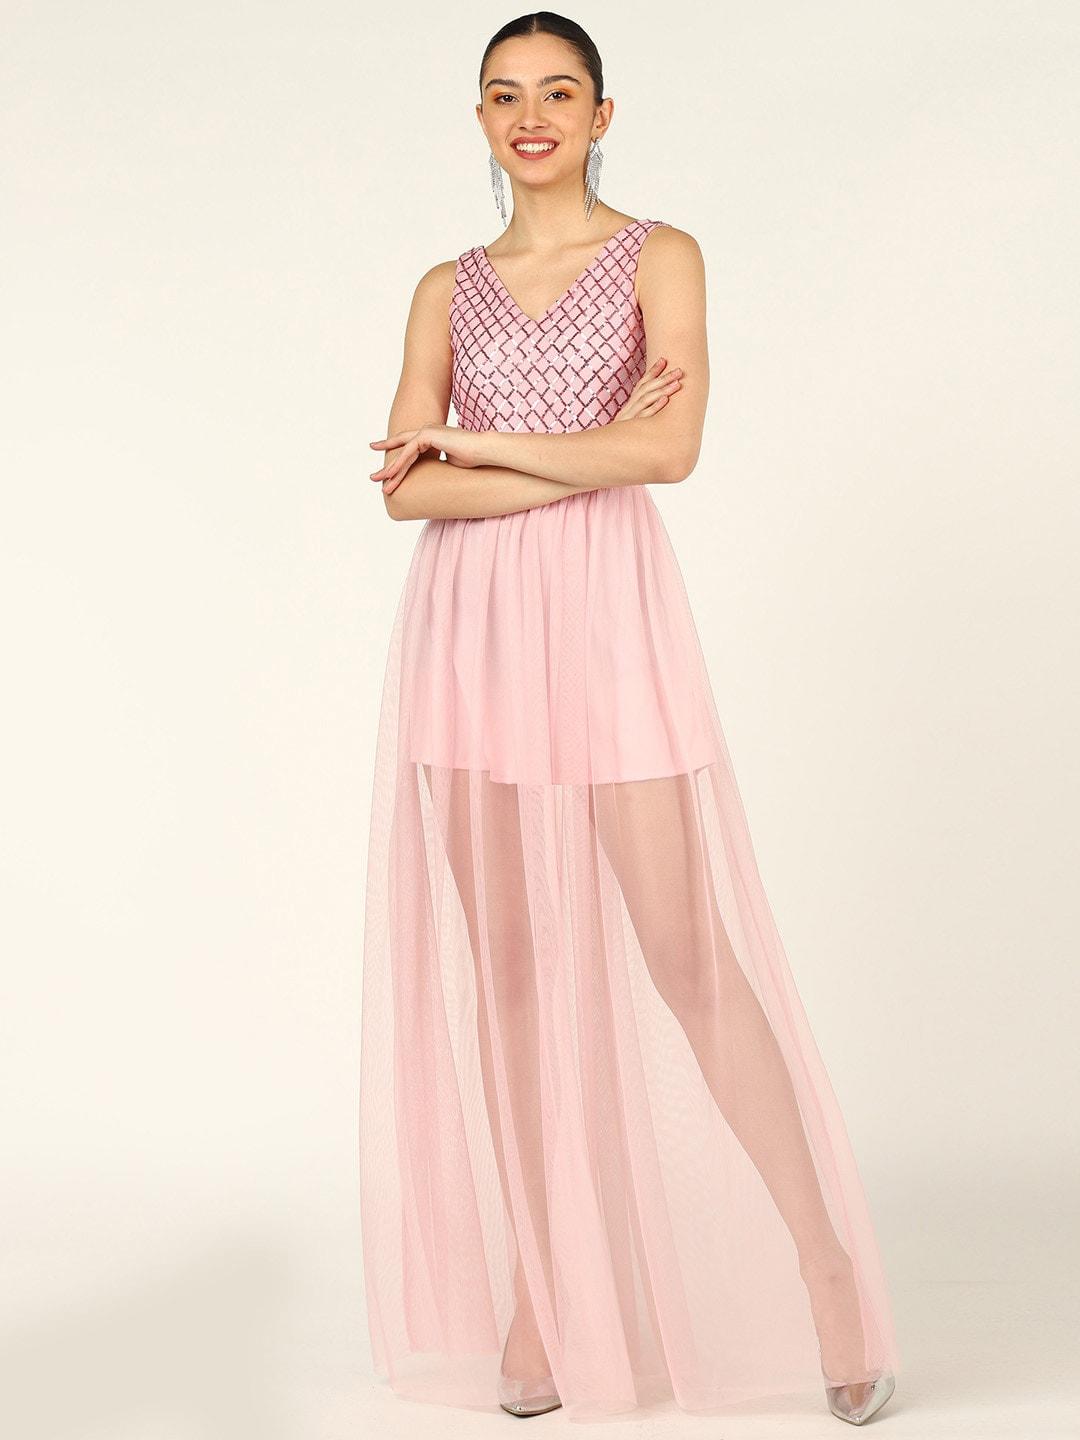 dodo & moa embellished sequined sheer fit & flare maxi dress